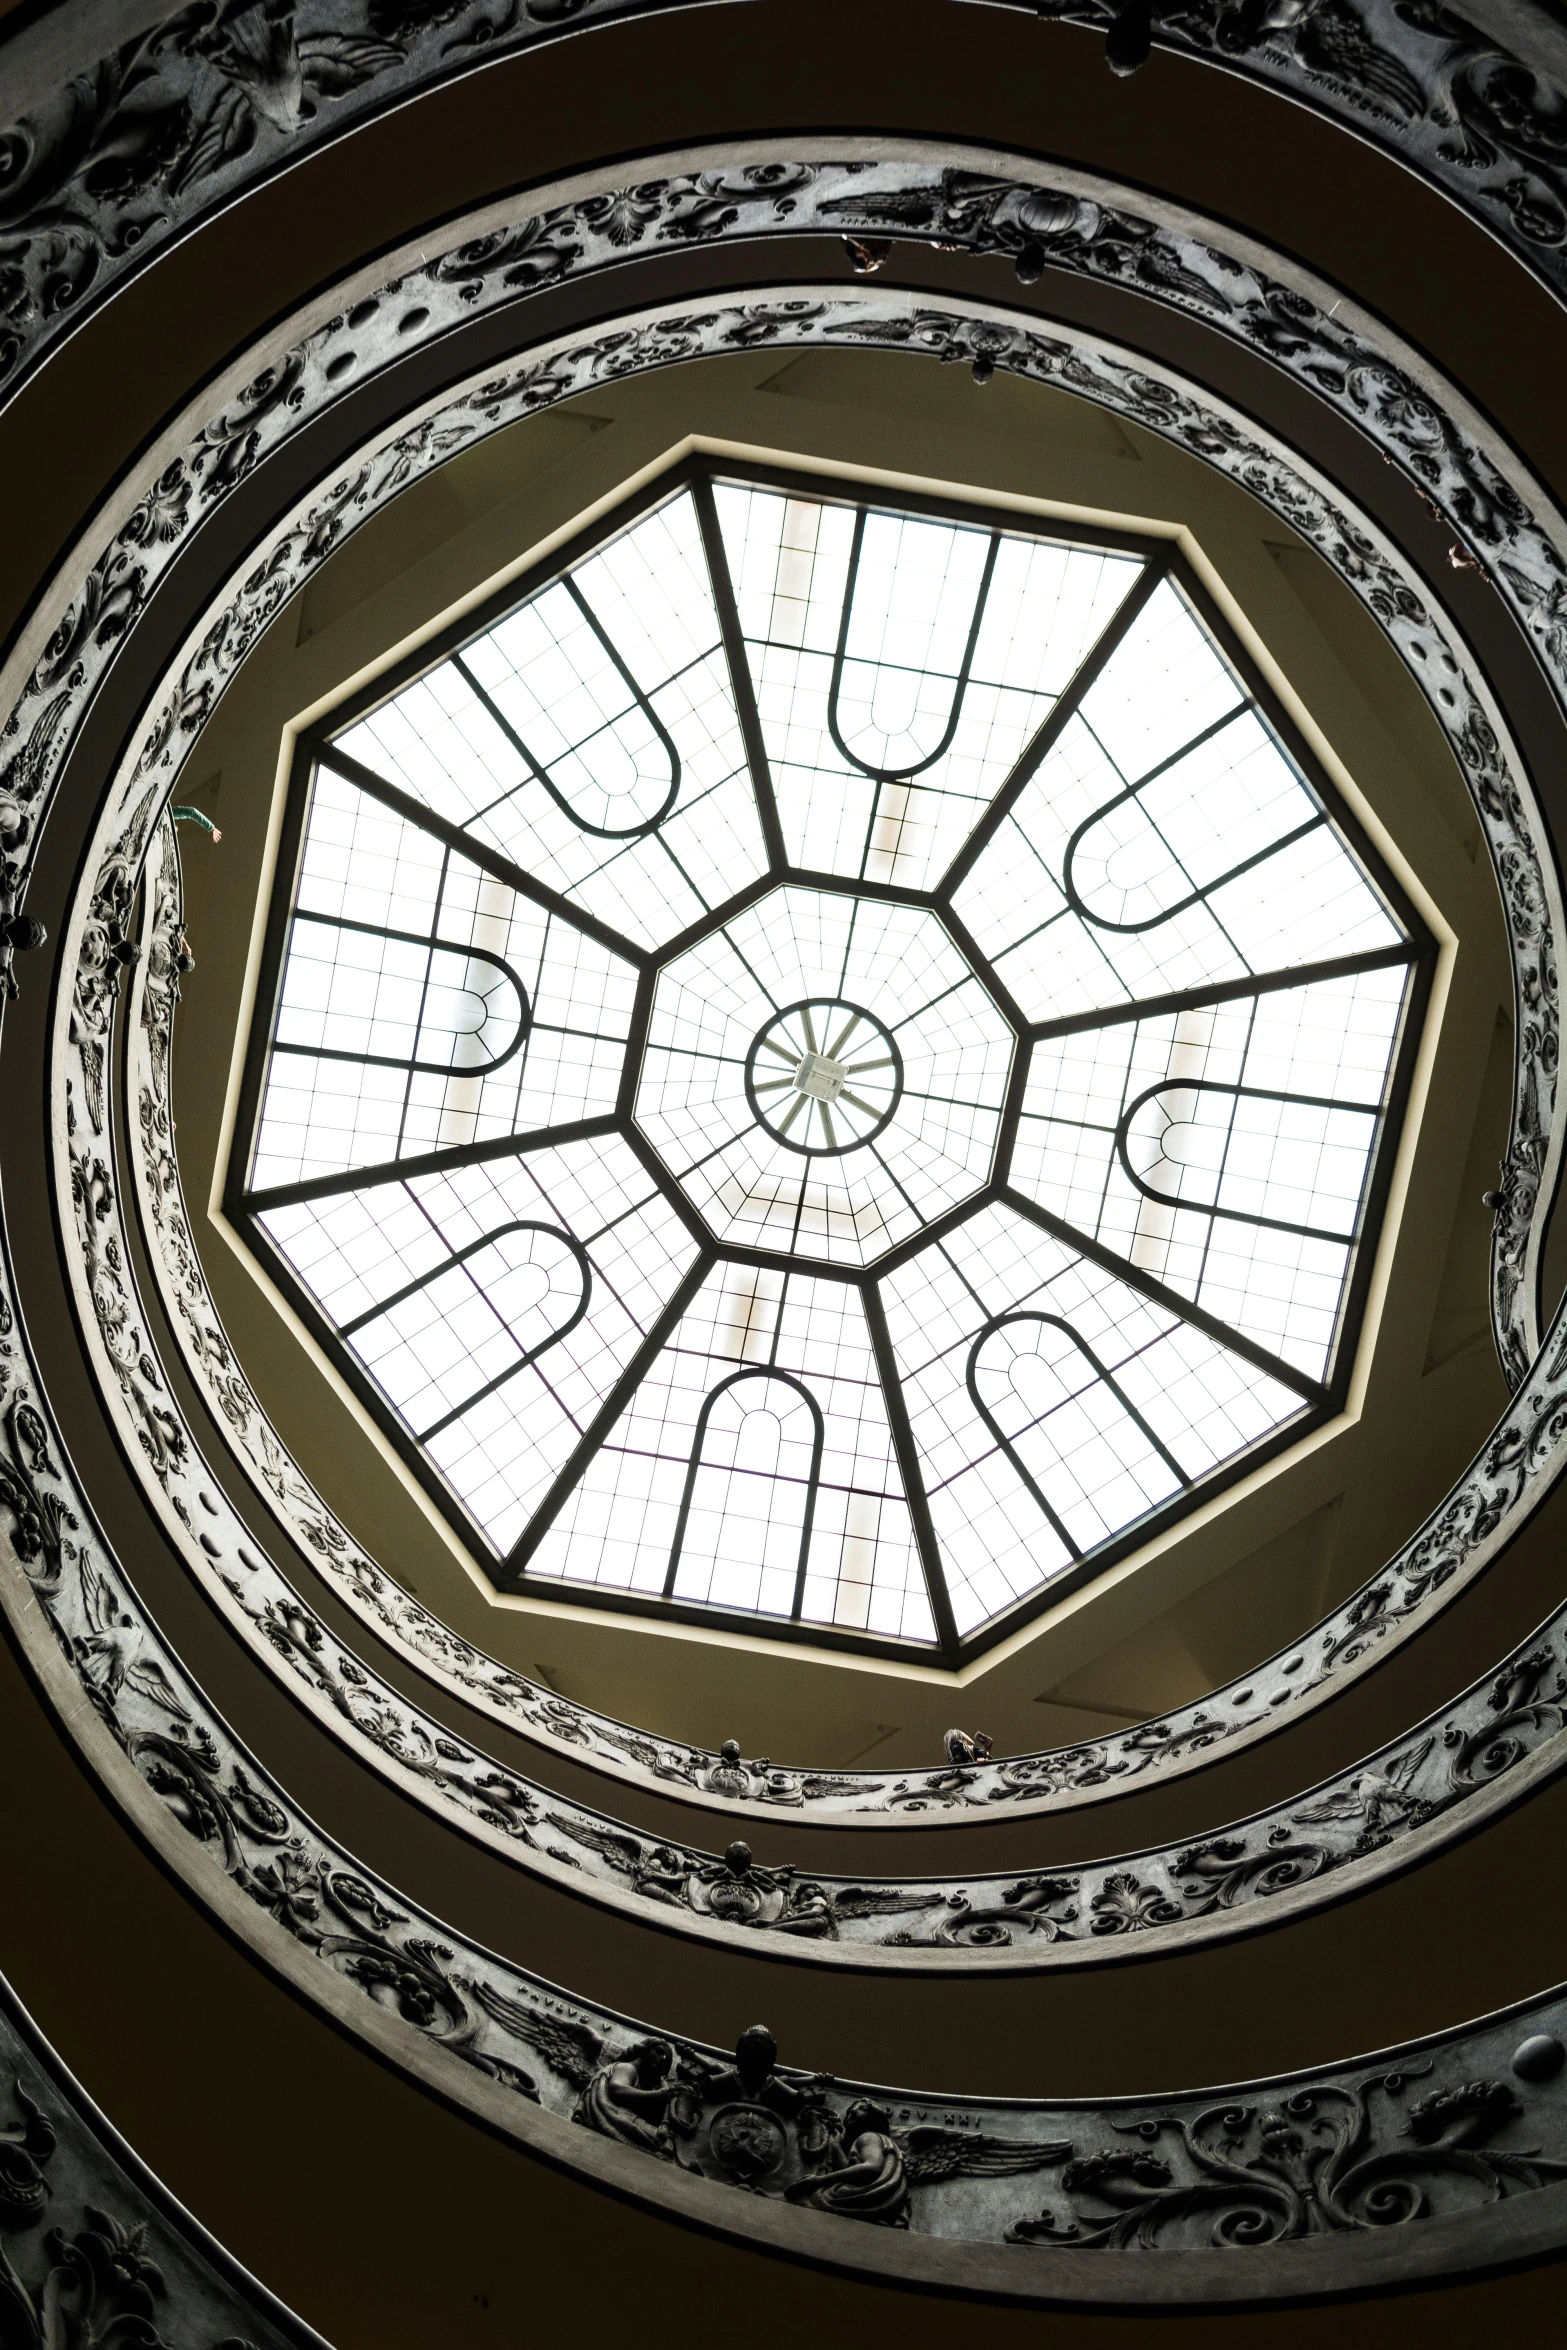 a small circular window is located on the top of the dome